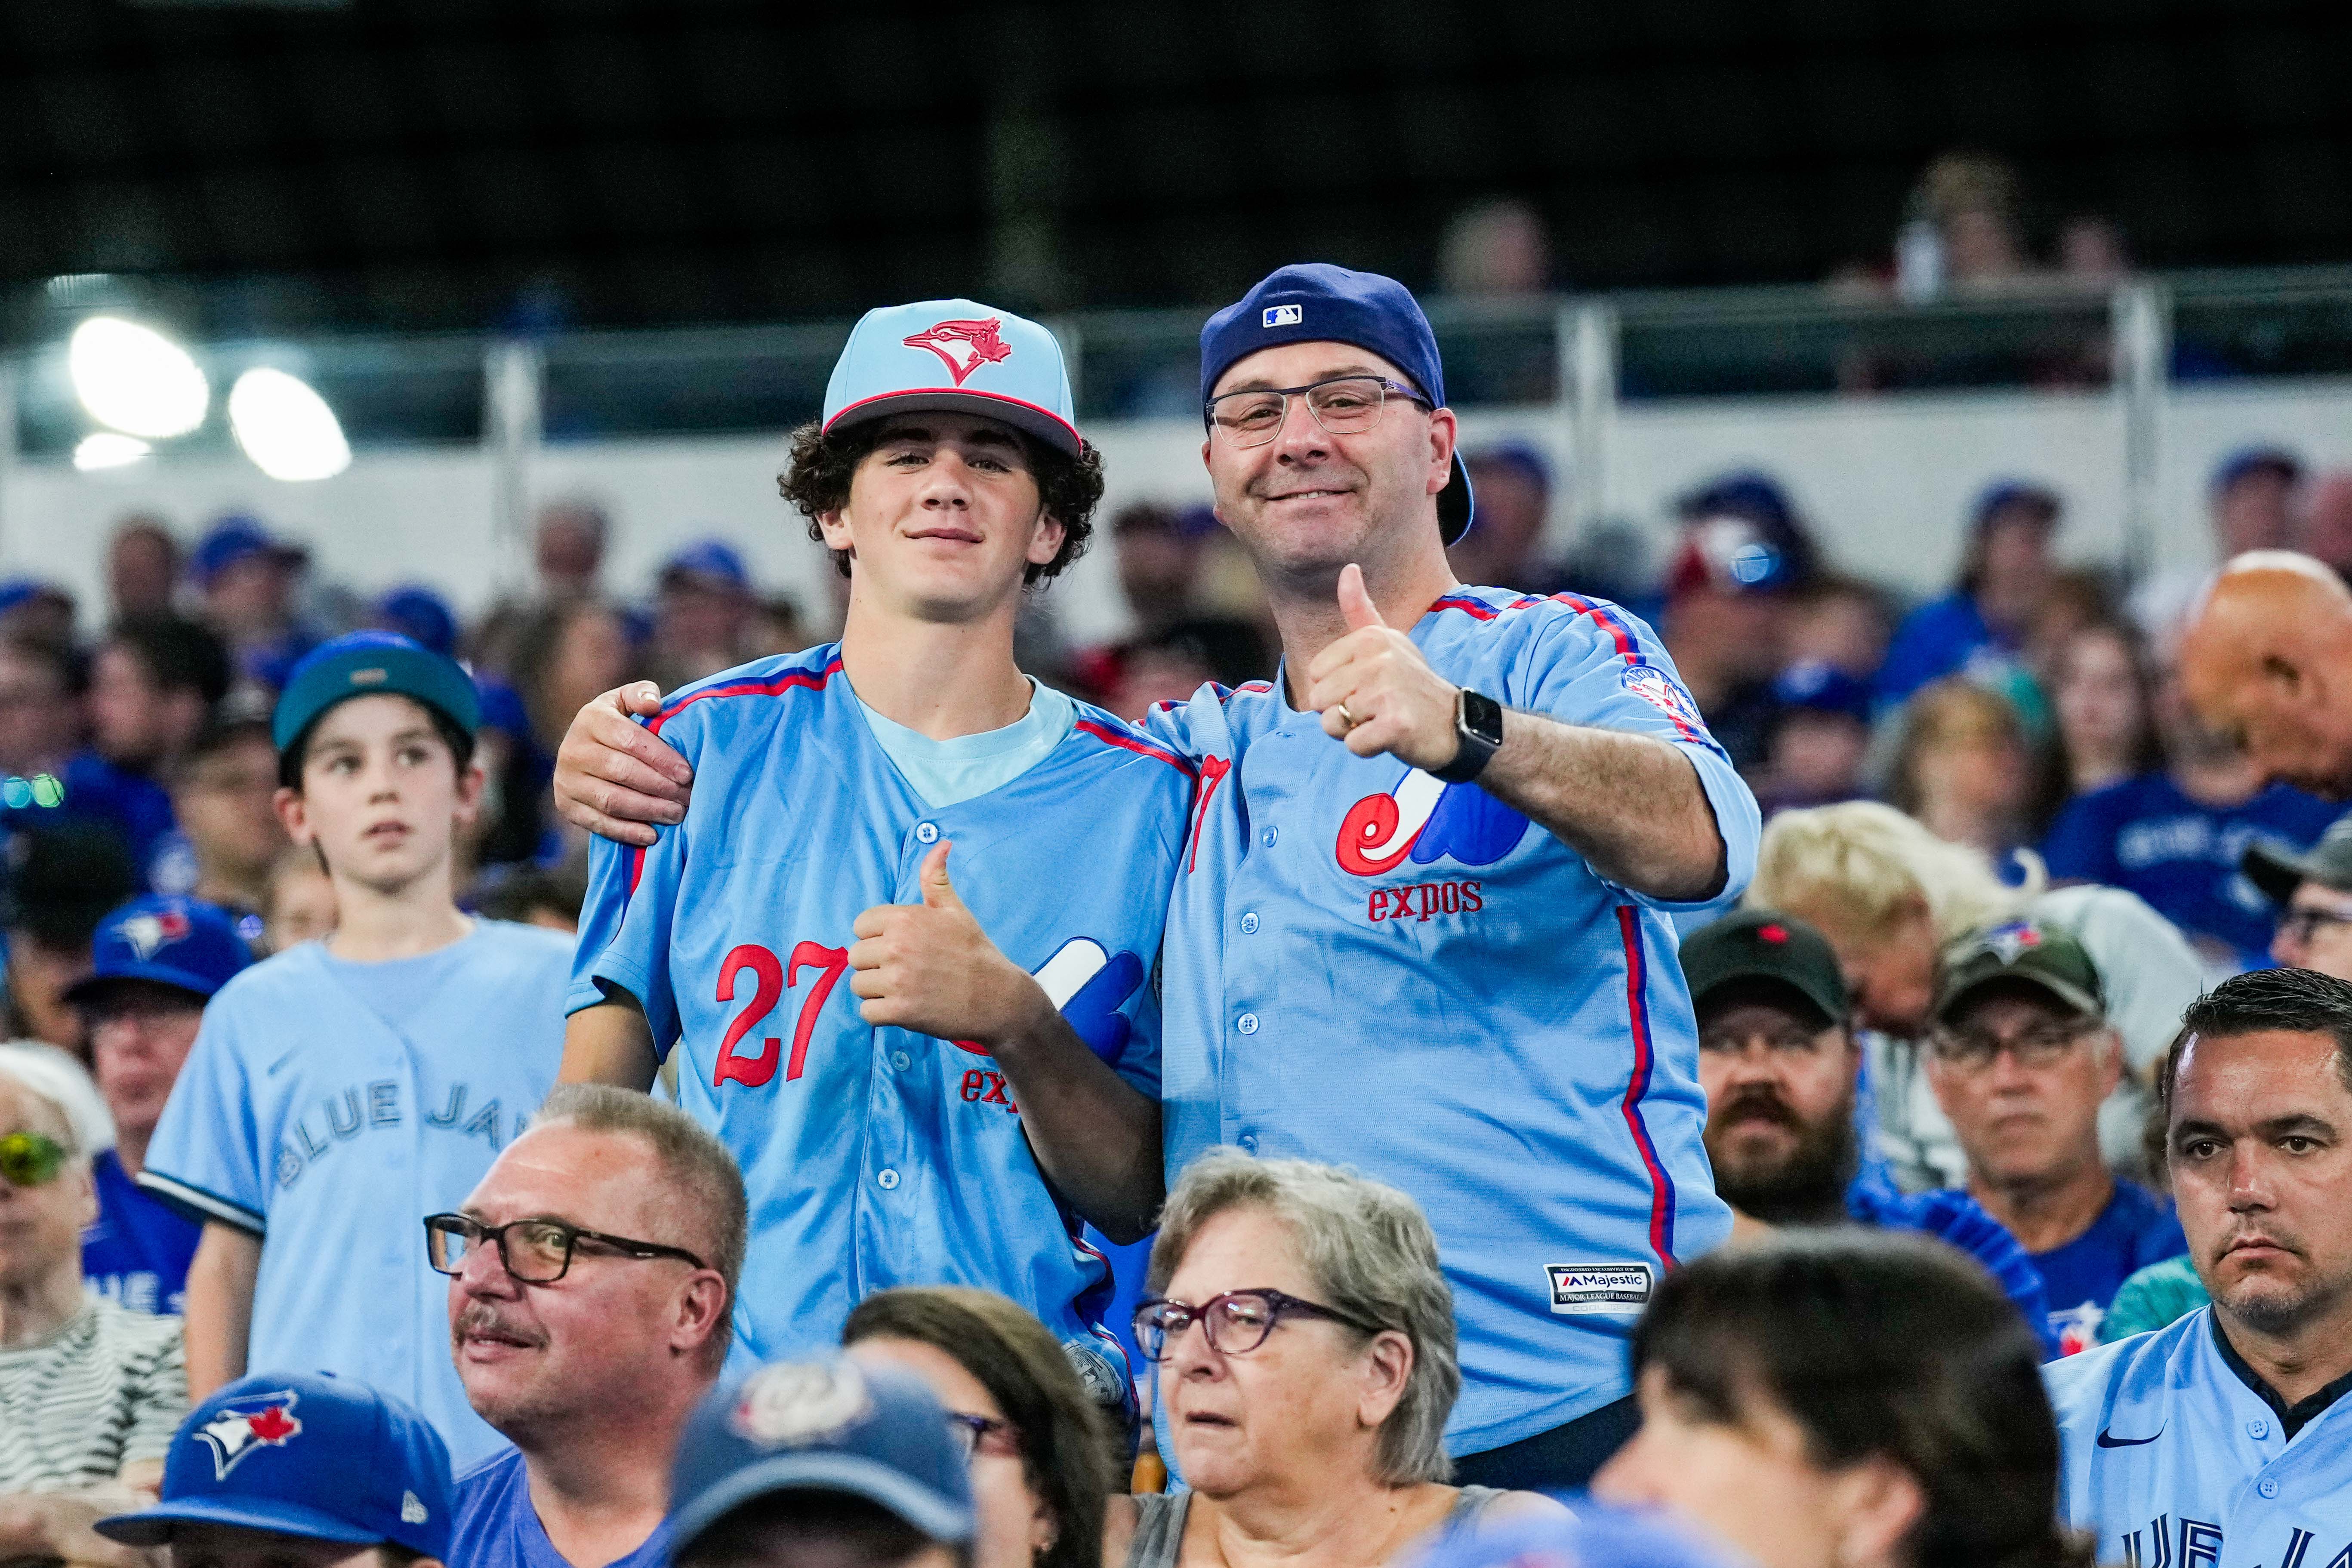 Montreal Expos fans are dealing with the Washington Nationals in